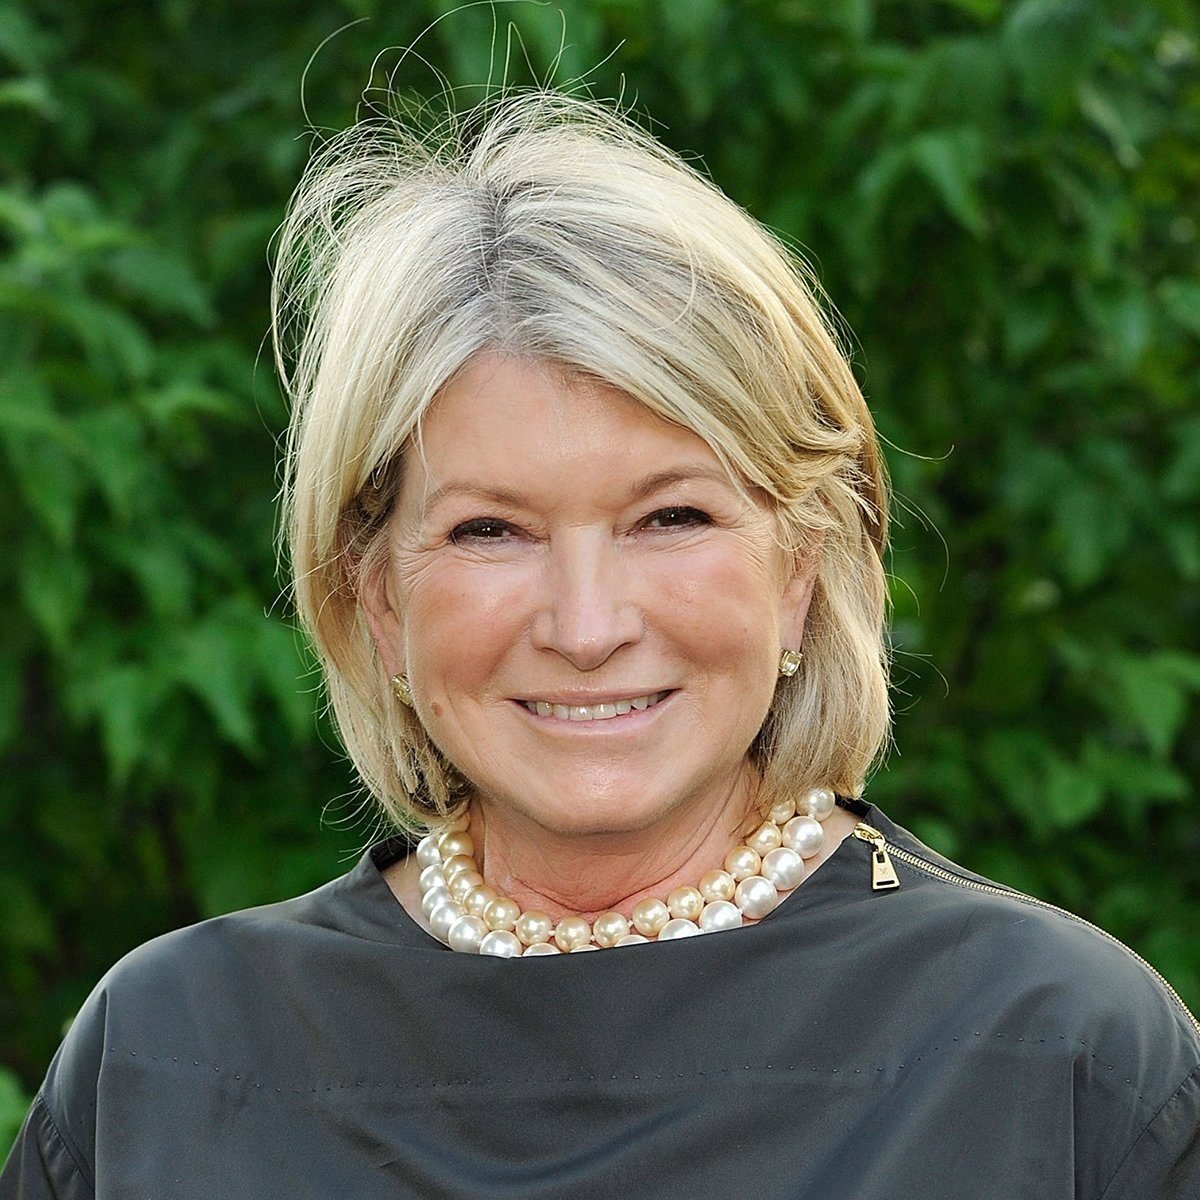 NEW YORK, NY - JUNE 01: Martha Stewart attends the New York Restoration Project's Spring Picnic at Morris-Jumel Mansion on June 1, 2016. (Photo by Rabbani and Solimene Photography/Getty Images)